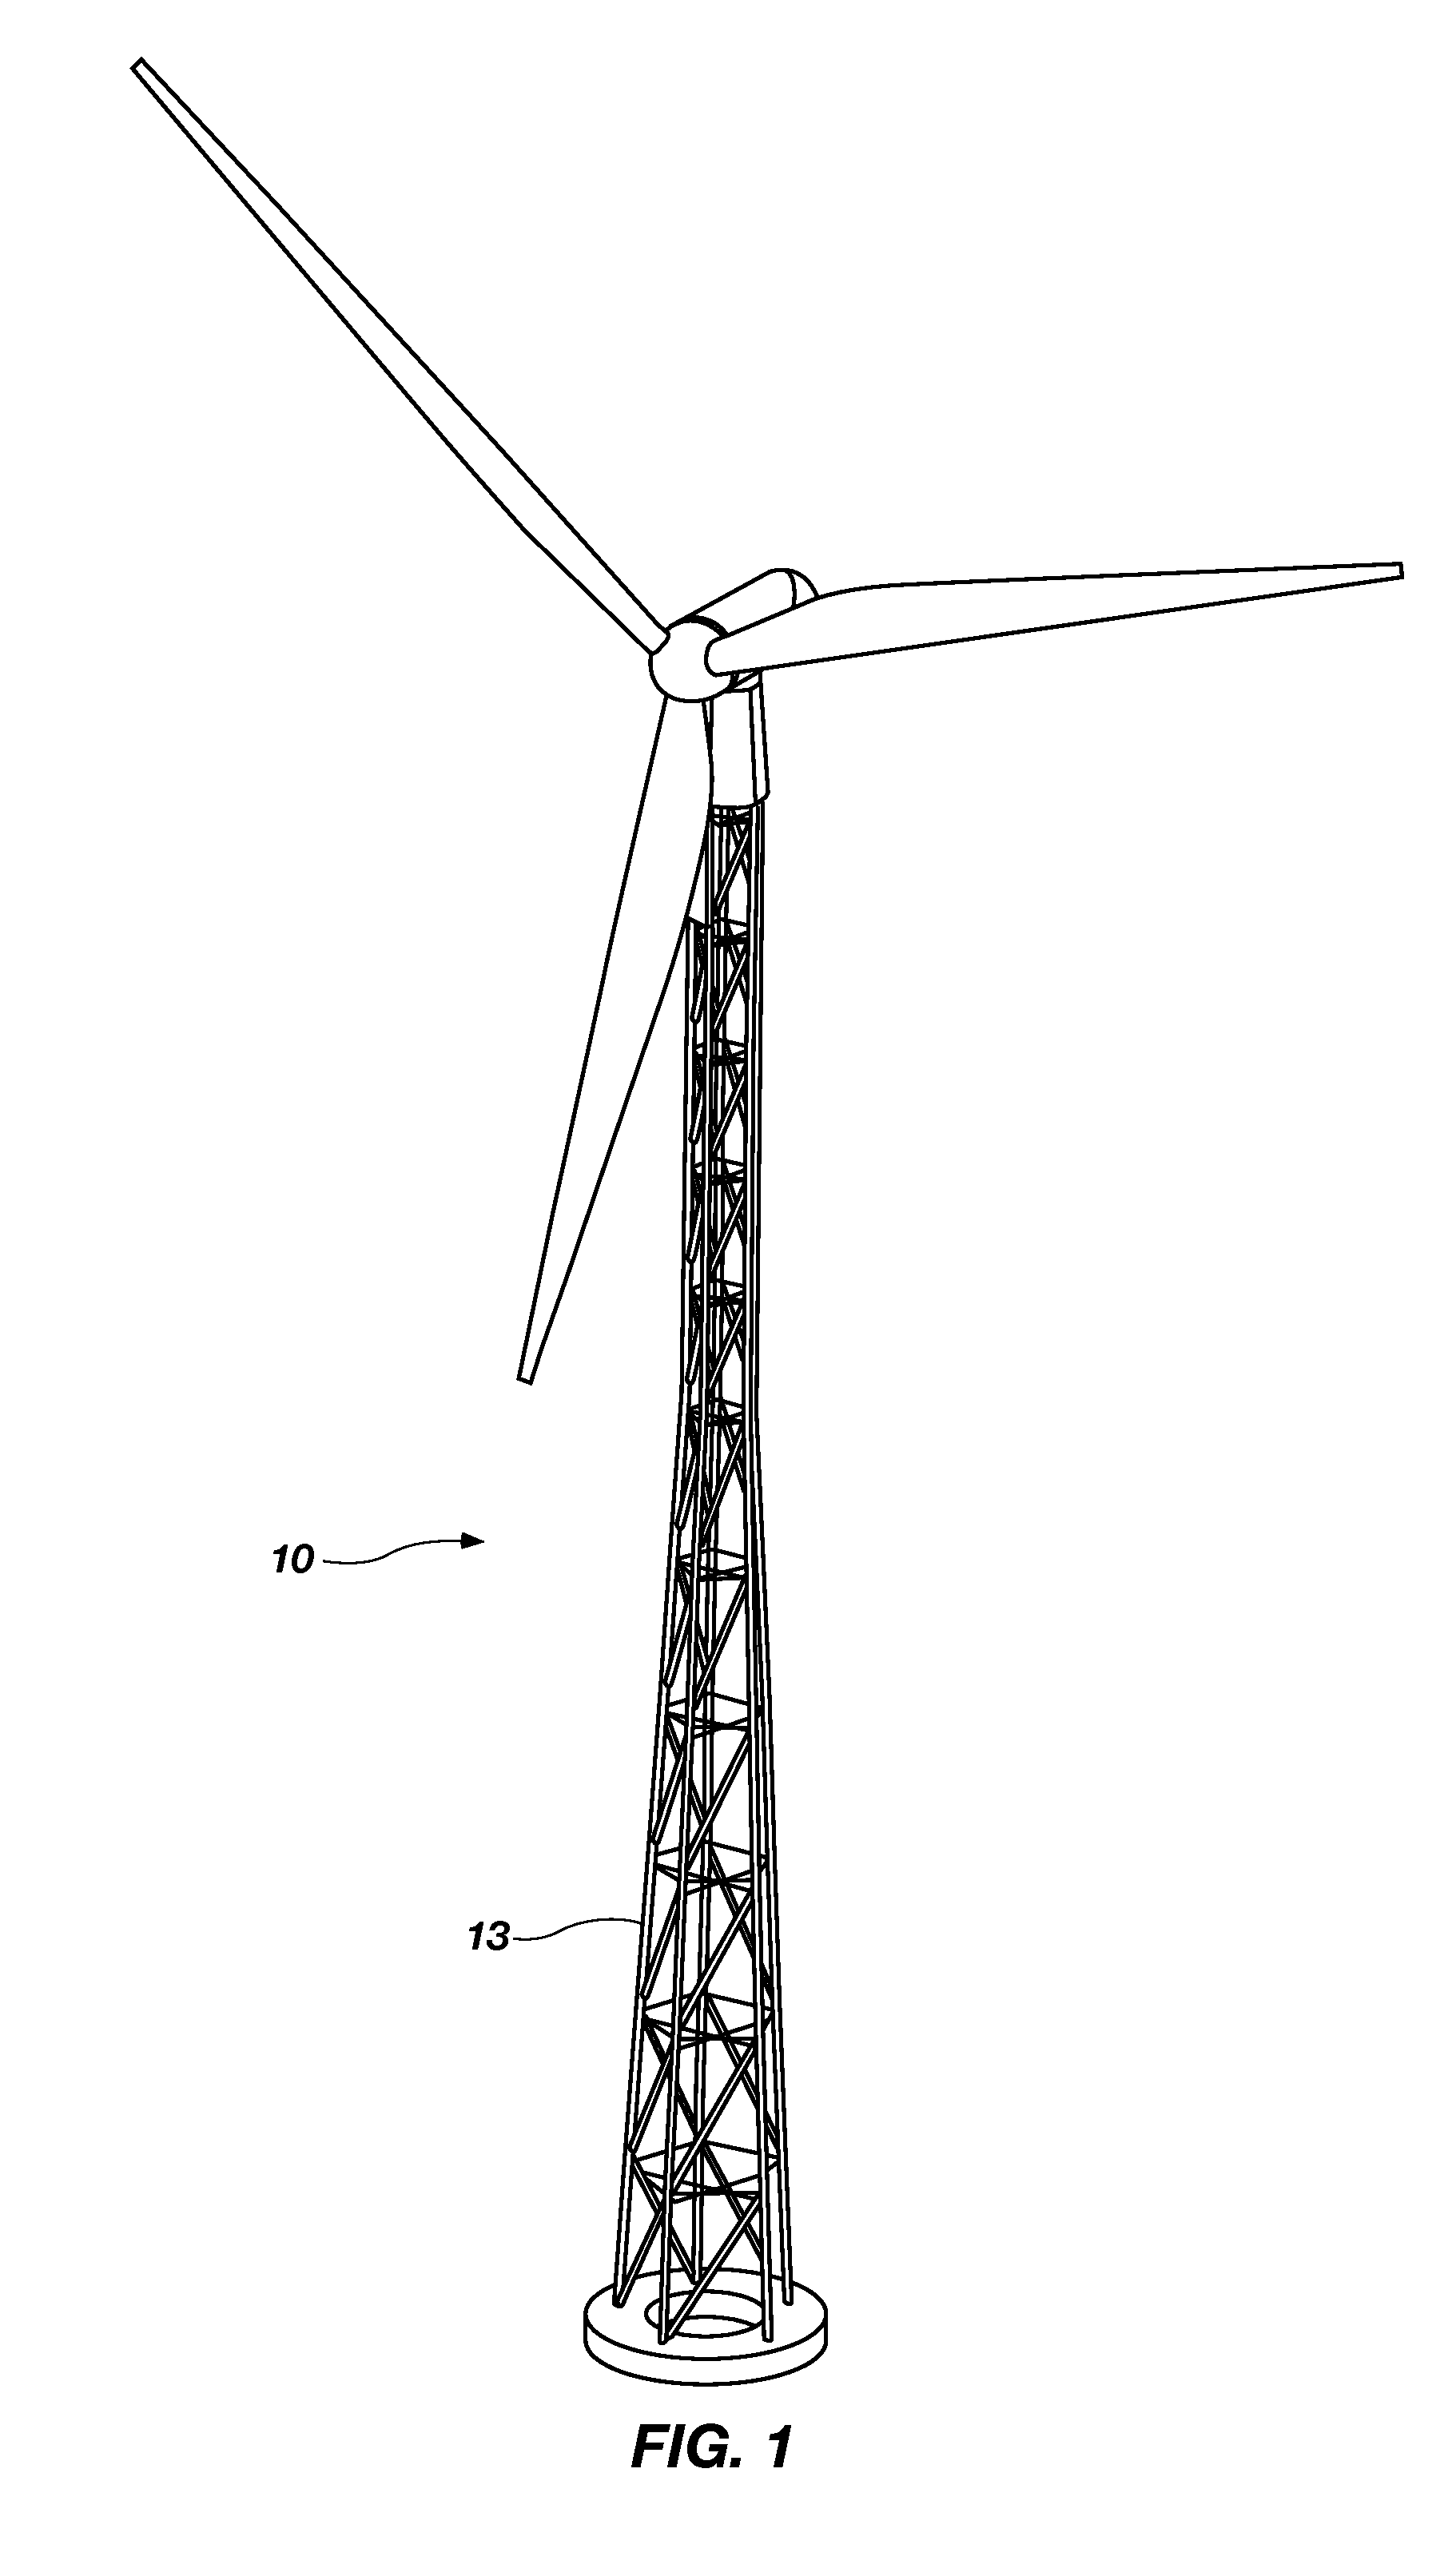 Structural shape for wind tower members